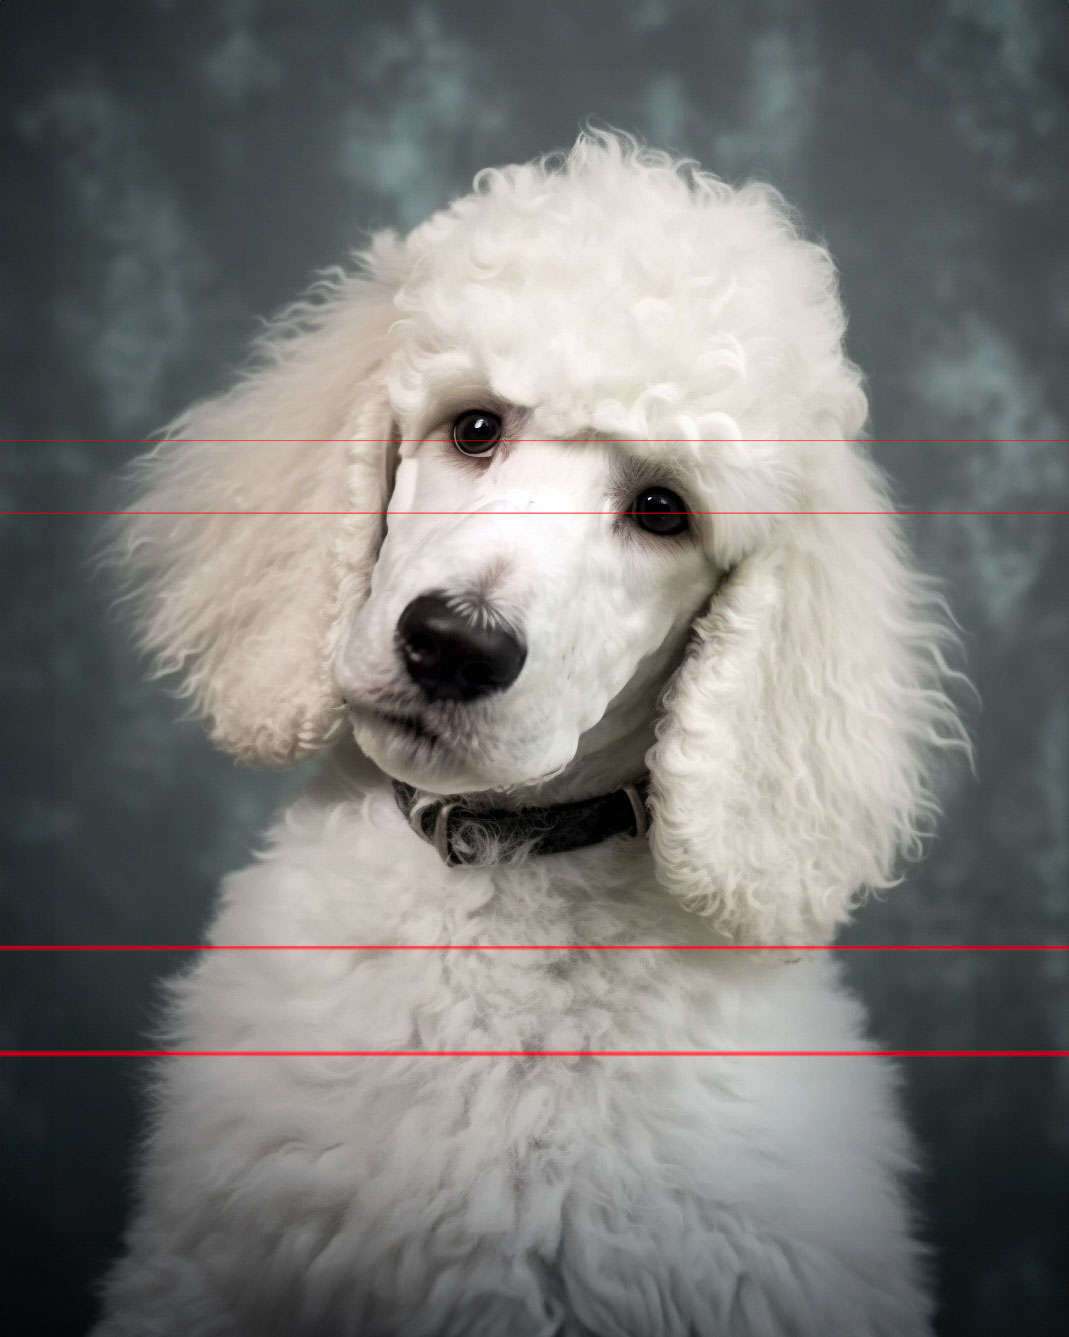 Standard White Poodle Puppy with Quizzical Look